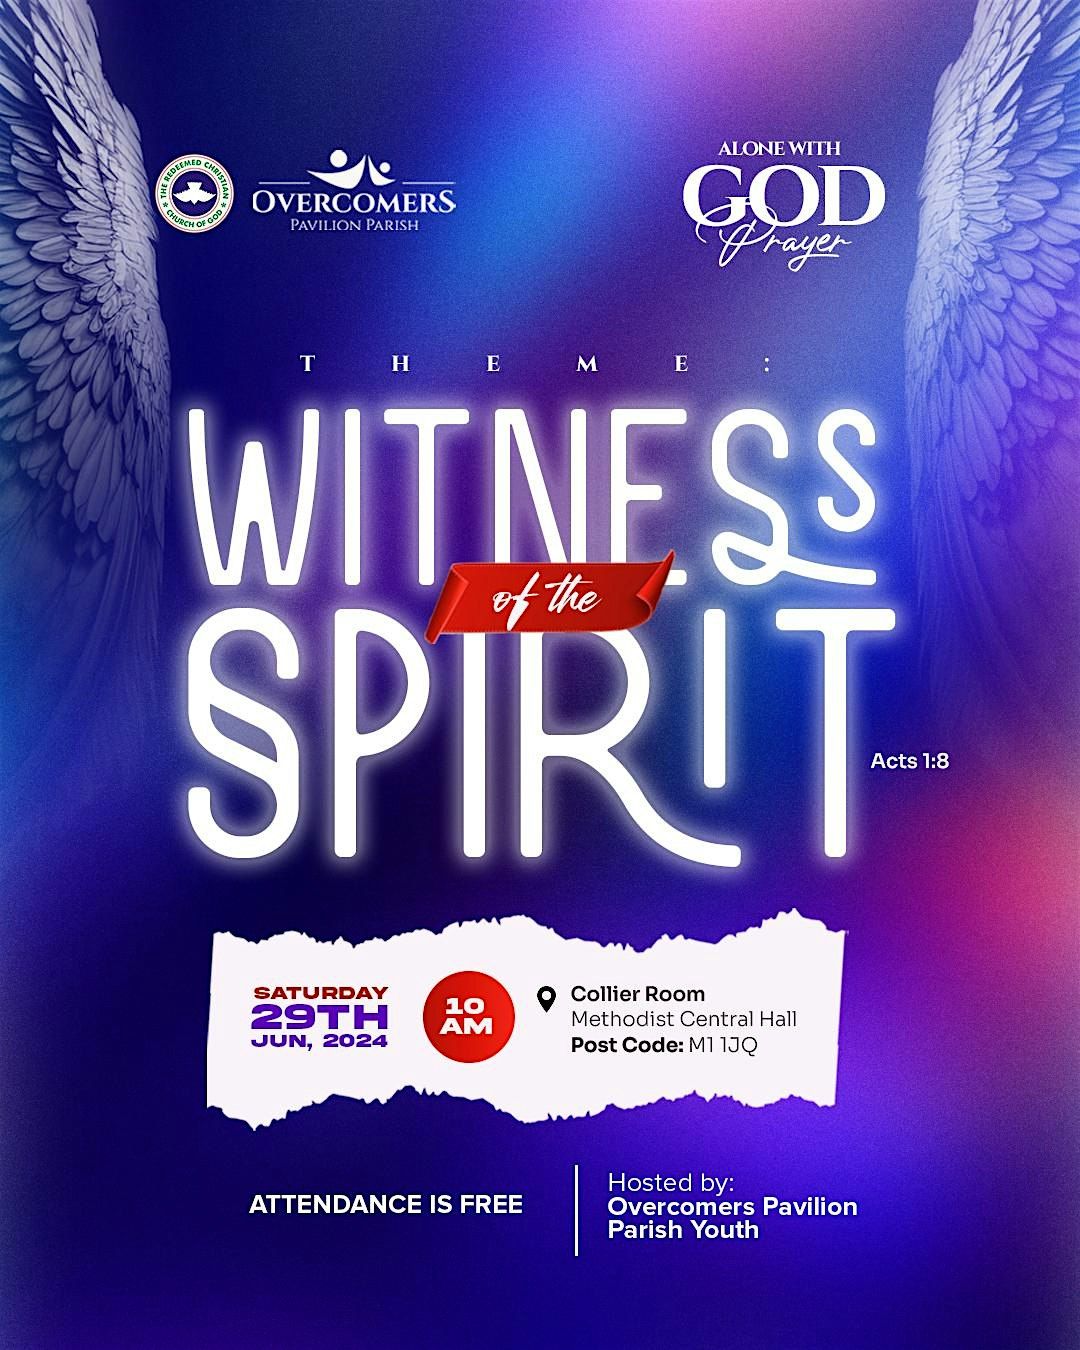 ALONE WITH GOD PRESENTS : WITNESS OF THE SPIRIT